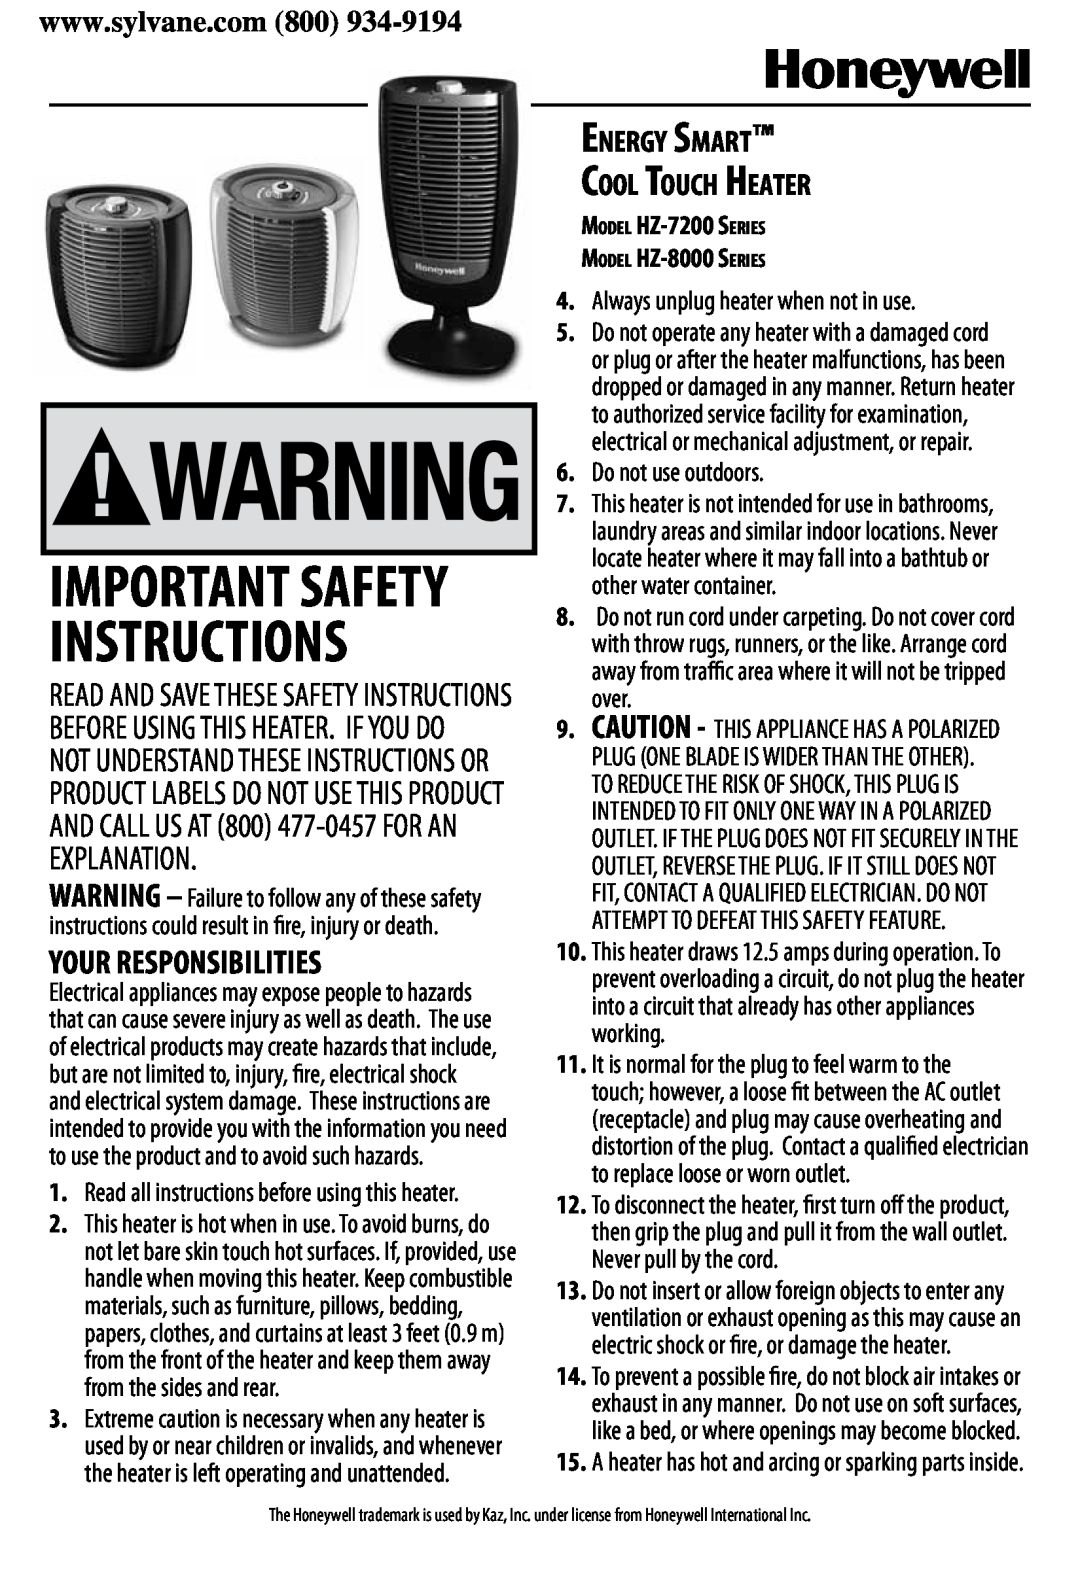 Honeywell HZ-8000 important safety instructions Your Responsibilities, Energy Smart Cool Touch Heater, Do not use outdoors 